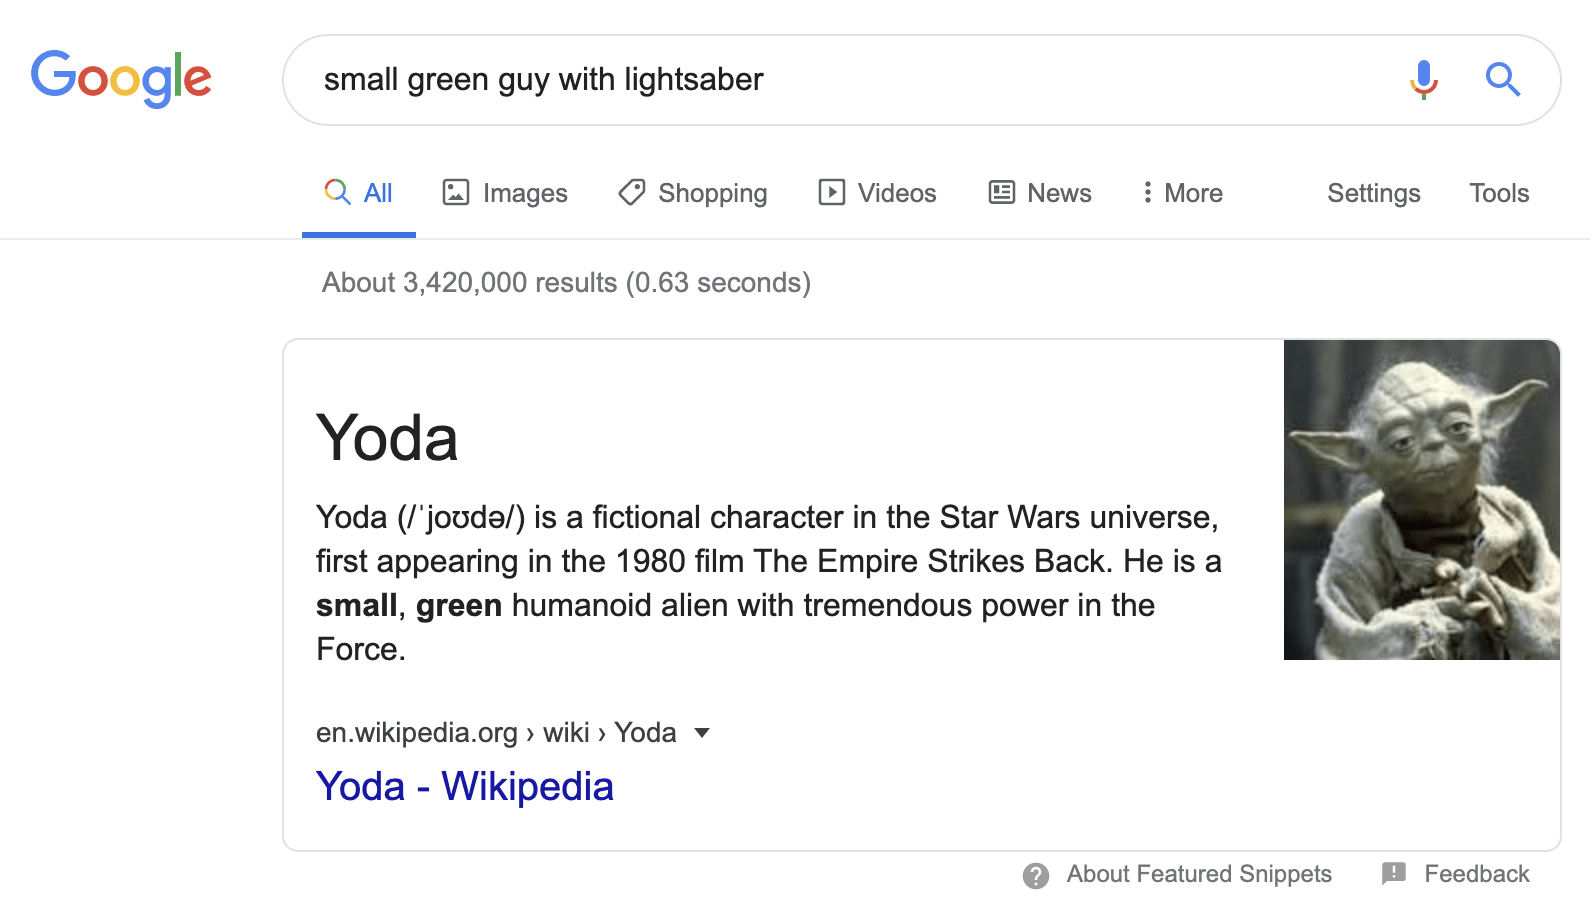 small green guy with lightsaber